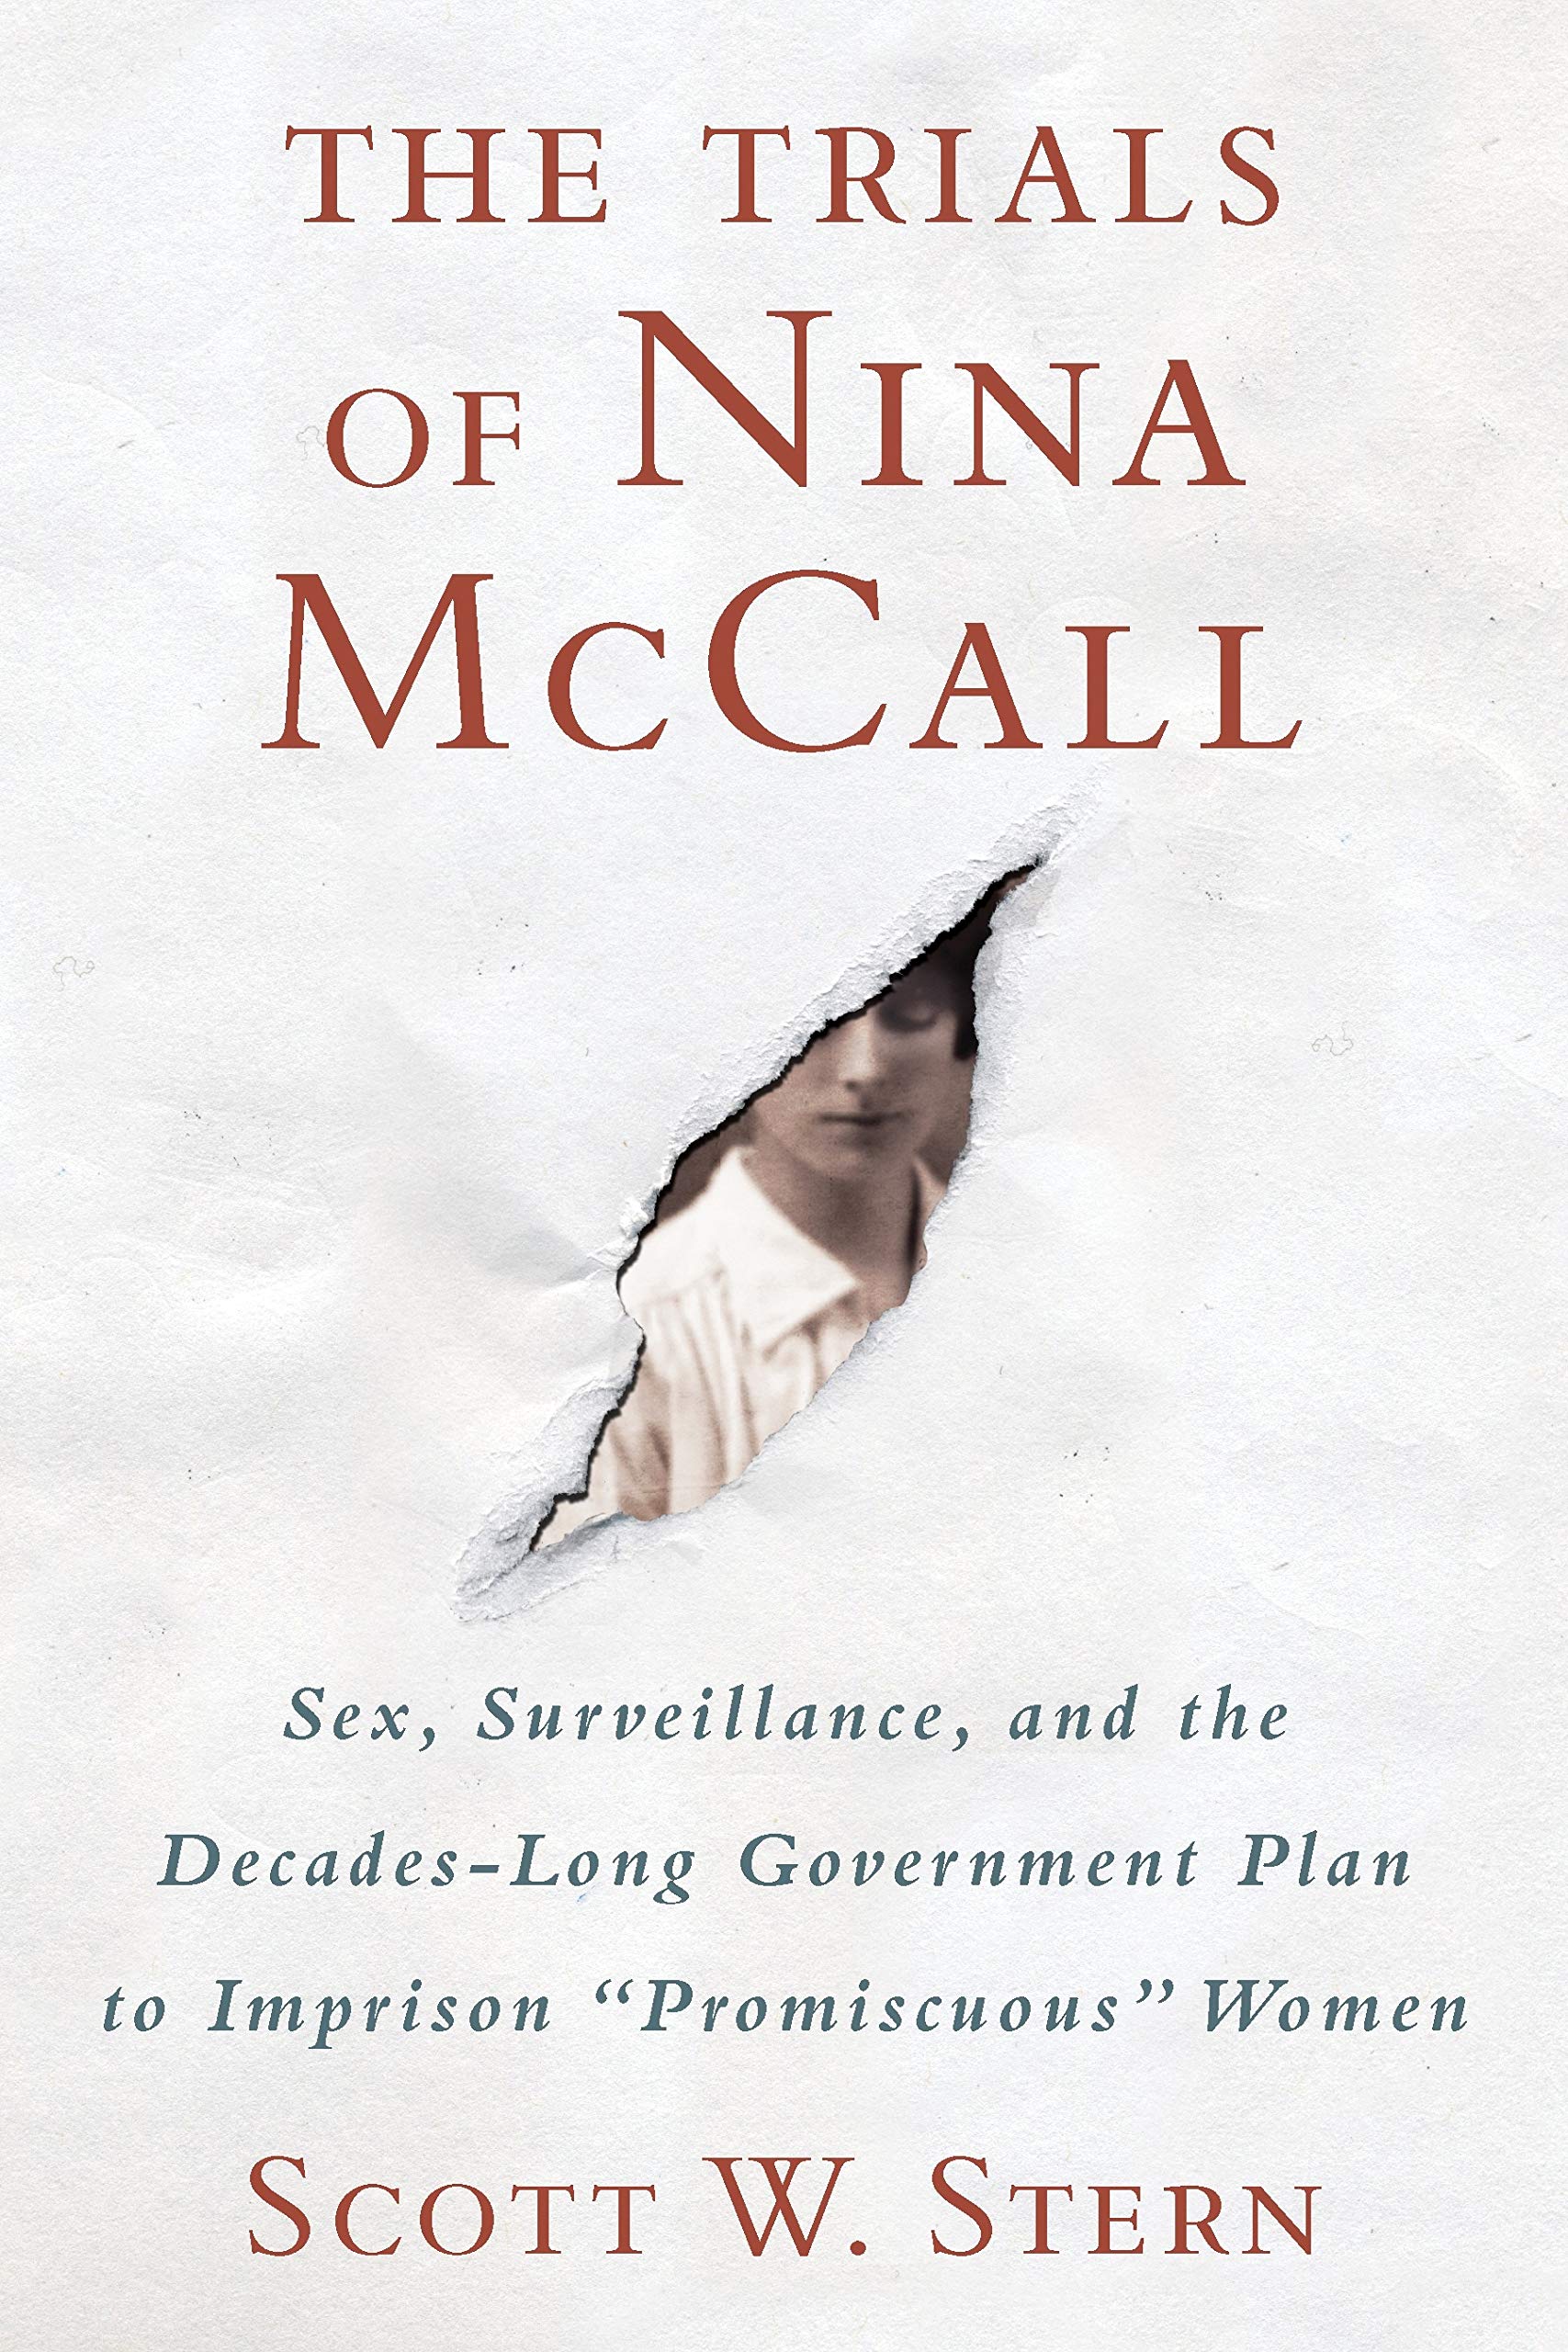 A book cover for The Trials of Nina McCall: Sex, Surveillance, and the Decades-Long Government Plan to Imprison ‘Promiscuous’ Women